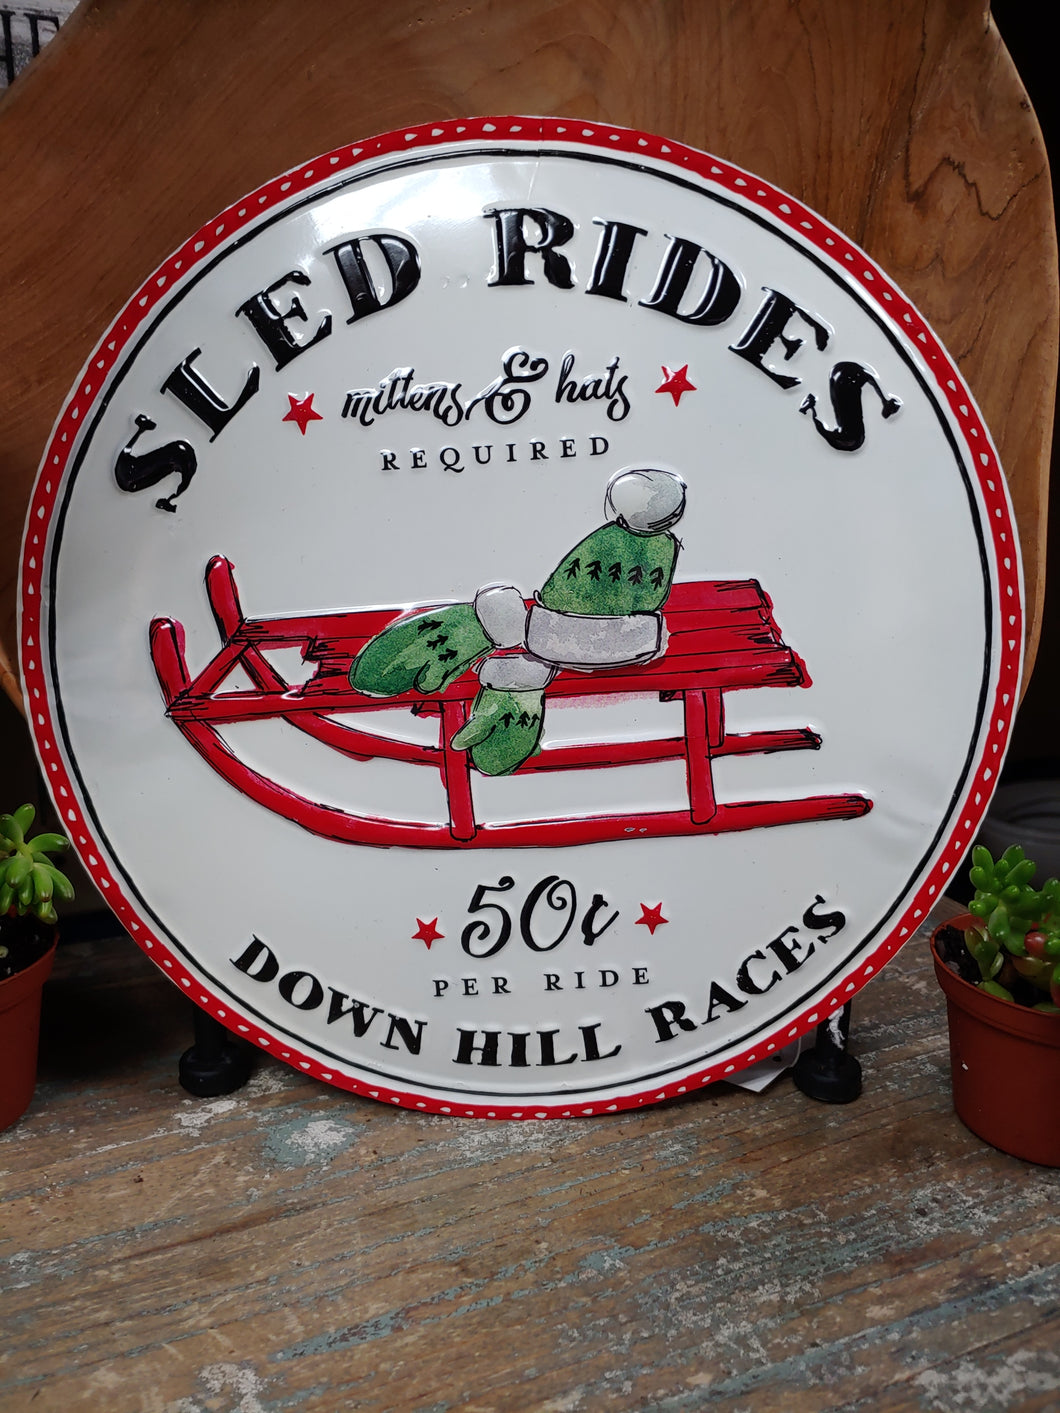 12”, ROUND, METAL/TIN CHRISTMAS SIGN. WHITE SIGN WITH RED TRIM AND SLED, AND GREEN AND WHITE MITTENS. WORDING, “SLED RIDES, MITTENS AND HATS REQUIRED,” “50¢ PER RIDE,” AND “DOWN HILL RIDES.” IT’S NEVER TOO EARLY FOR CHRISTMAS ITEMS.